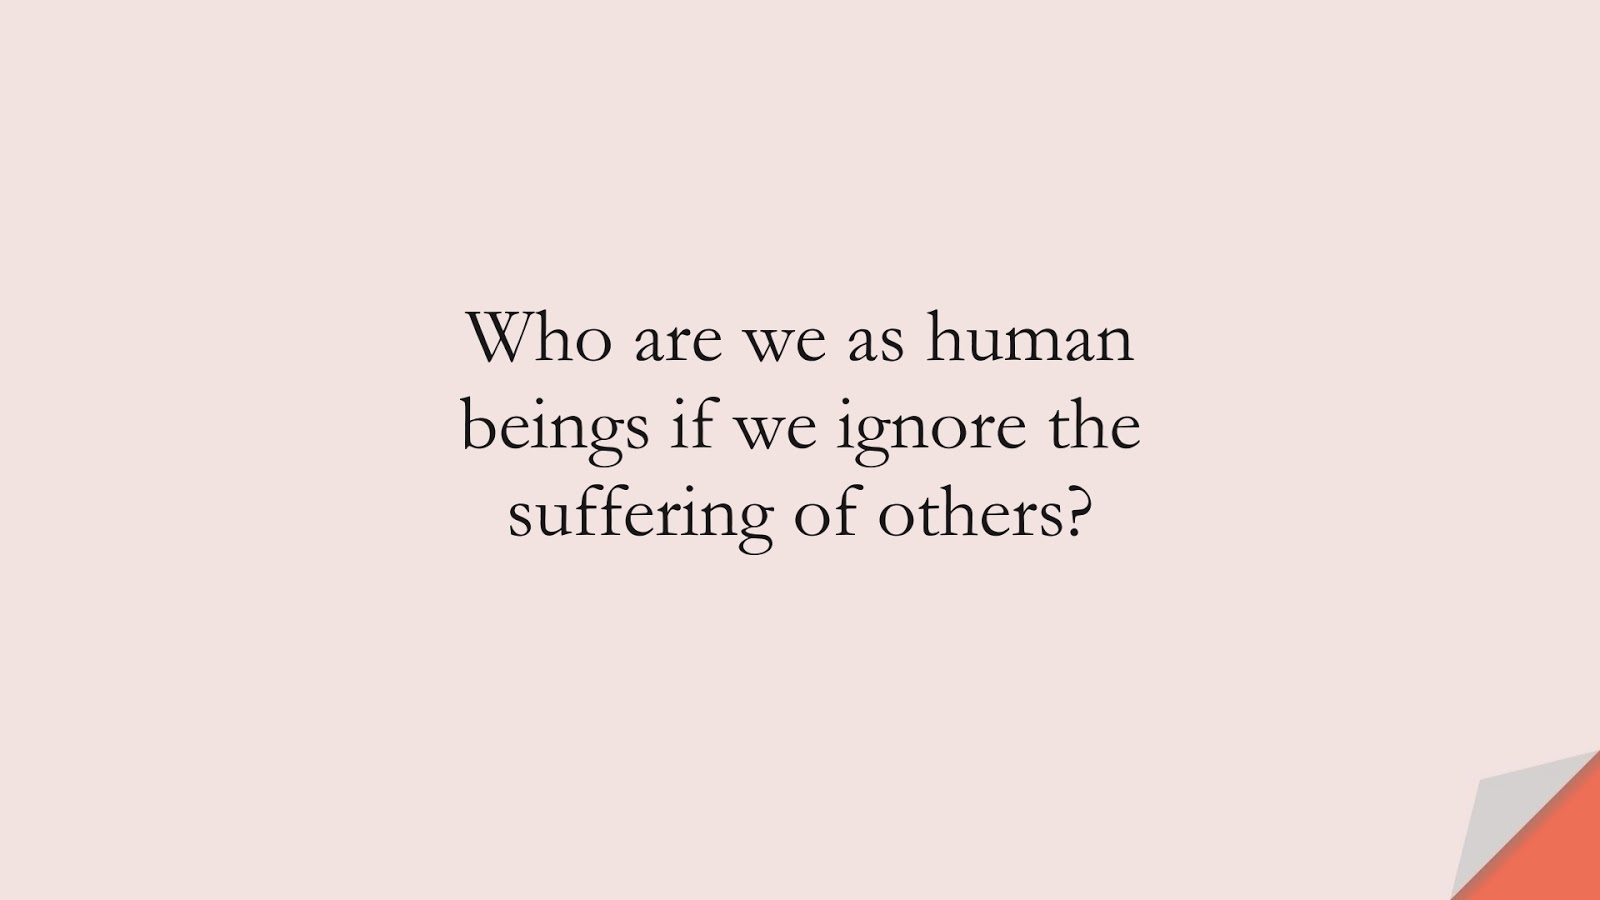 Who are we as human beings if we ignore the suffering of others?FALSE